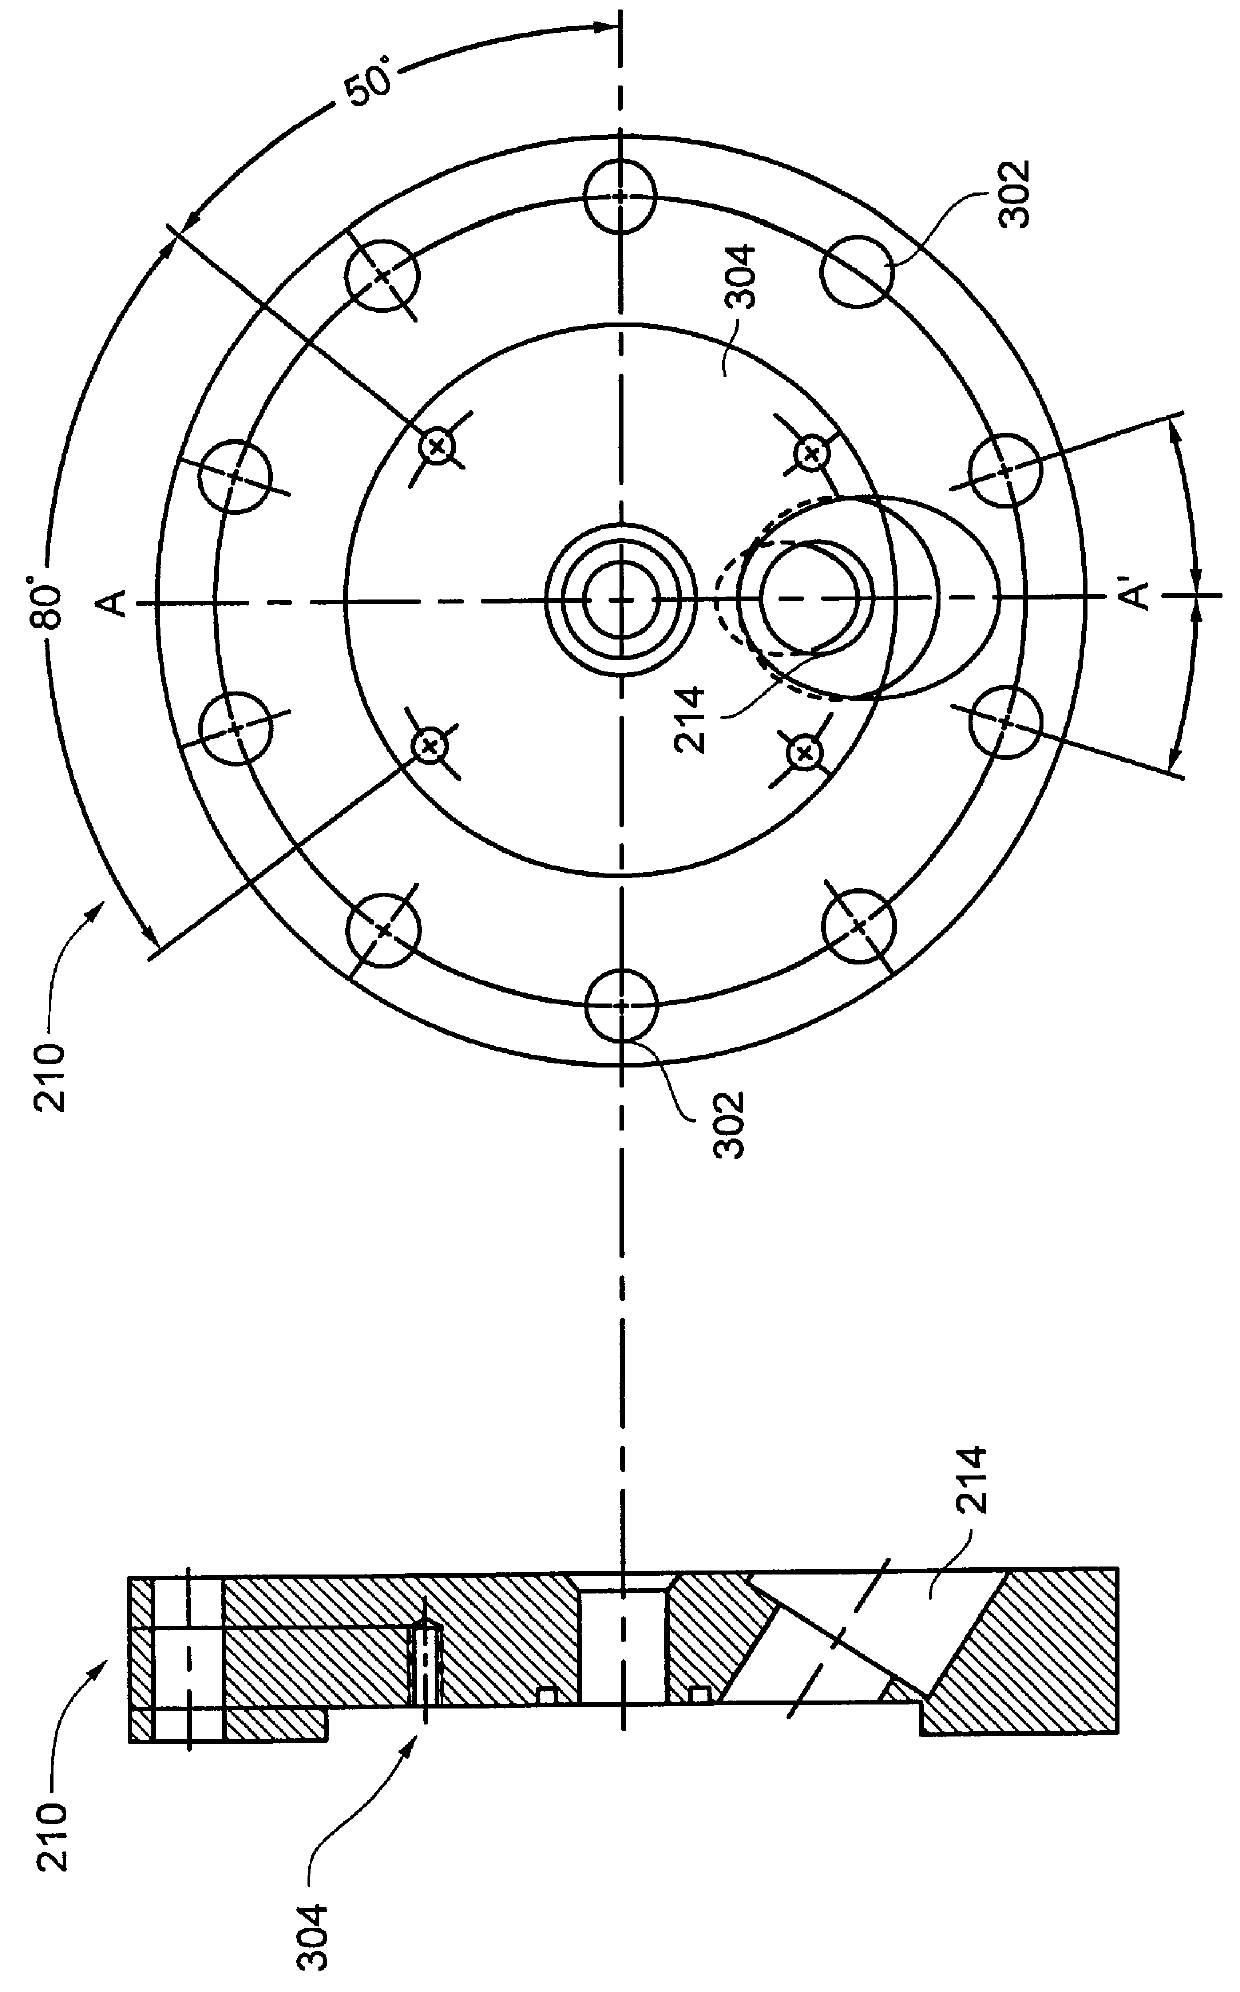 In-line cell for absorption spectroscopy